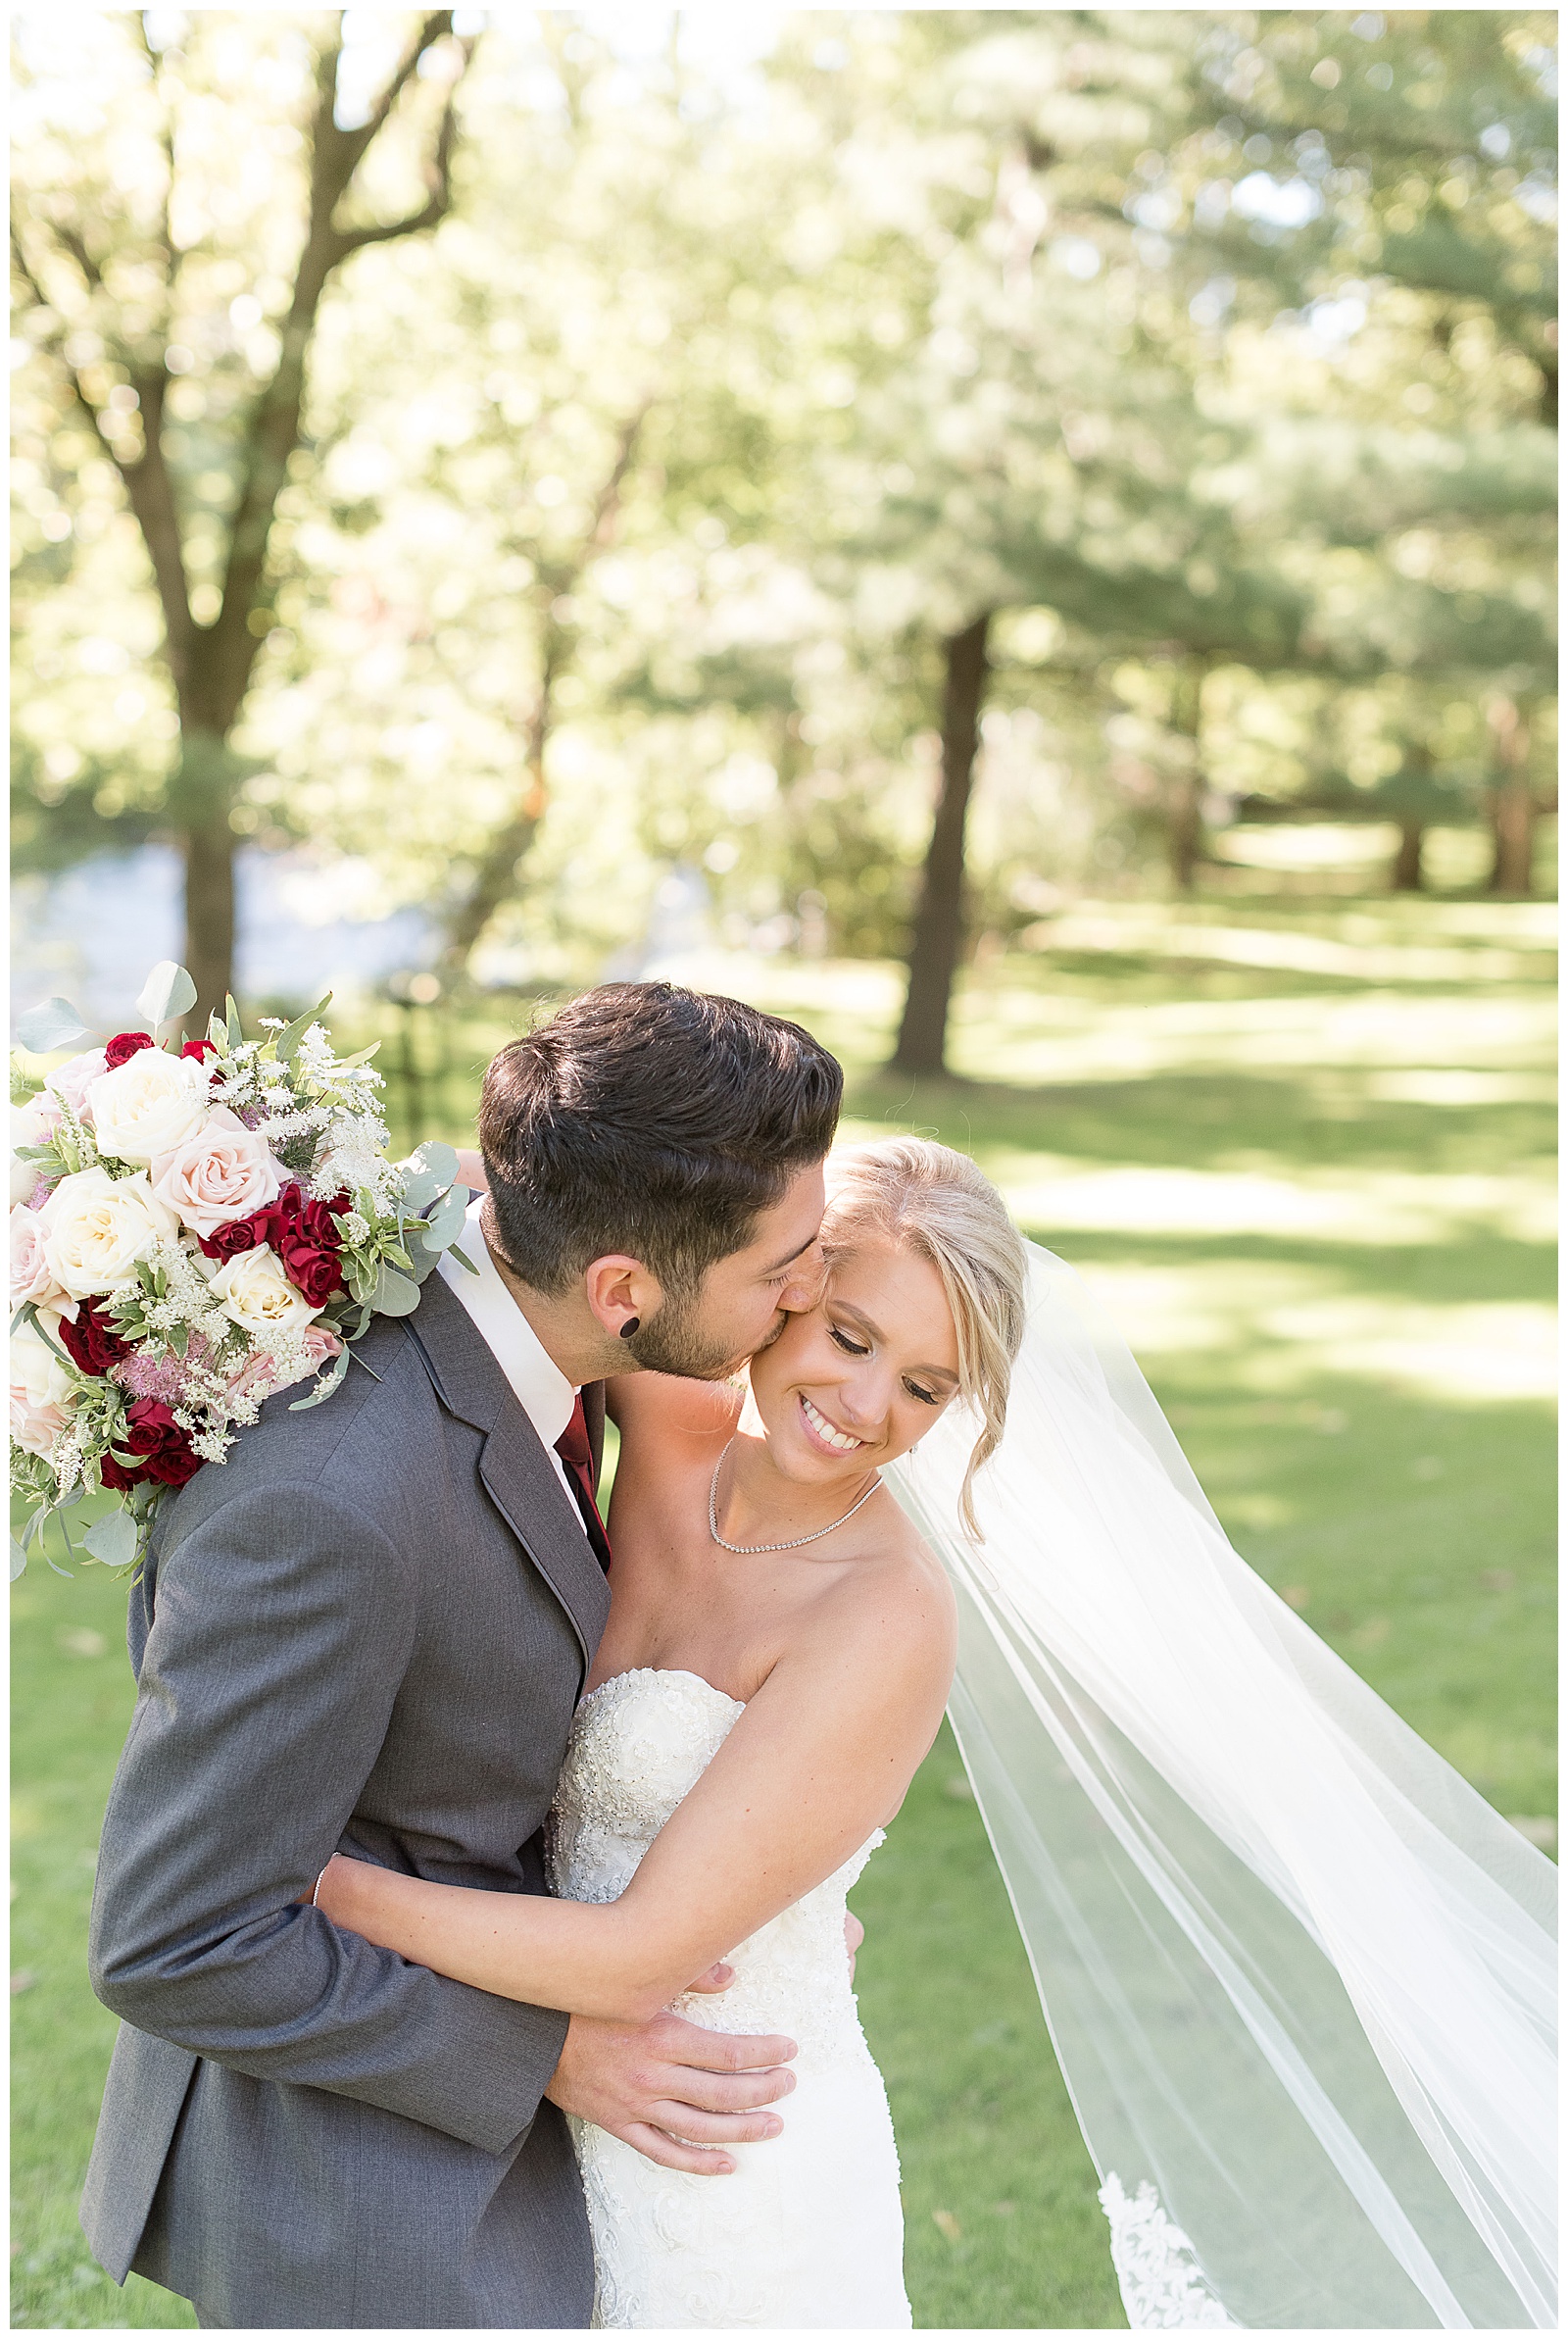 groom and bride are hugging with the groom on the left and the bride on the right and he is kissing her on the right side of her face while she holds her bridal bouquet around his back and looks down towards the ground smiling and her veil blows in the wind beside her and the groom is in a dark gray suit and the bride is in a white strapless gown with grass and trees and sunshine behind them at Riverdale Manor in Lancaster, PA